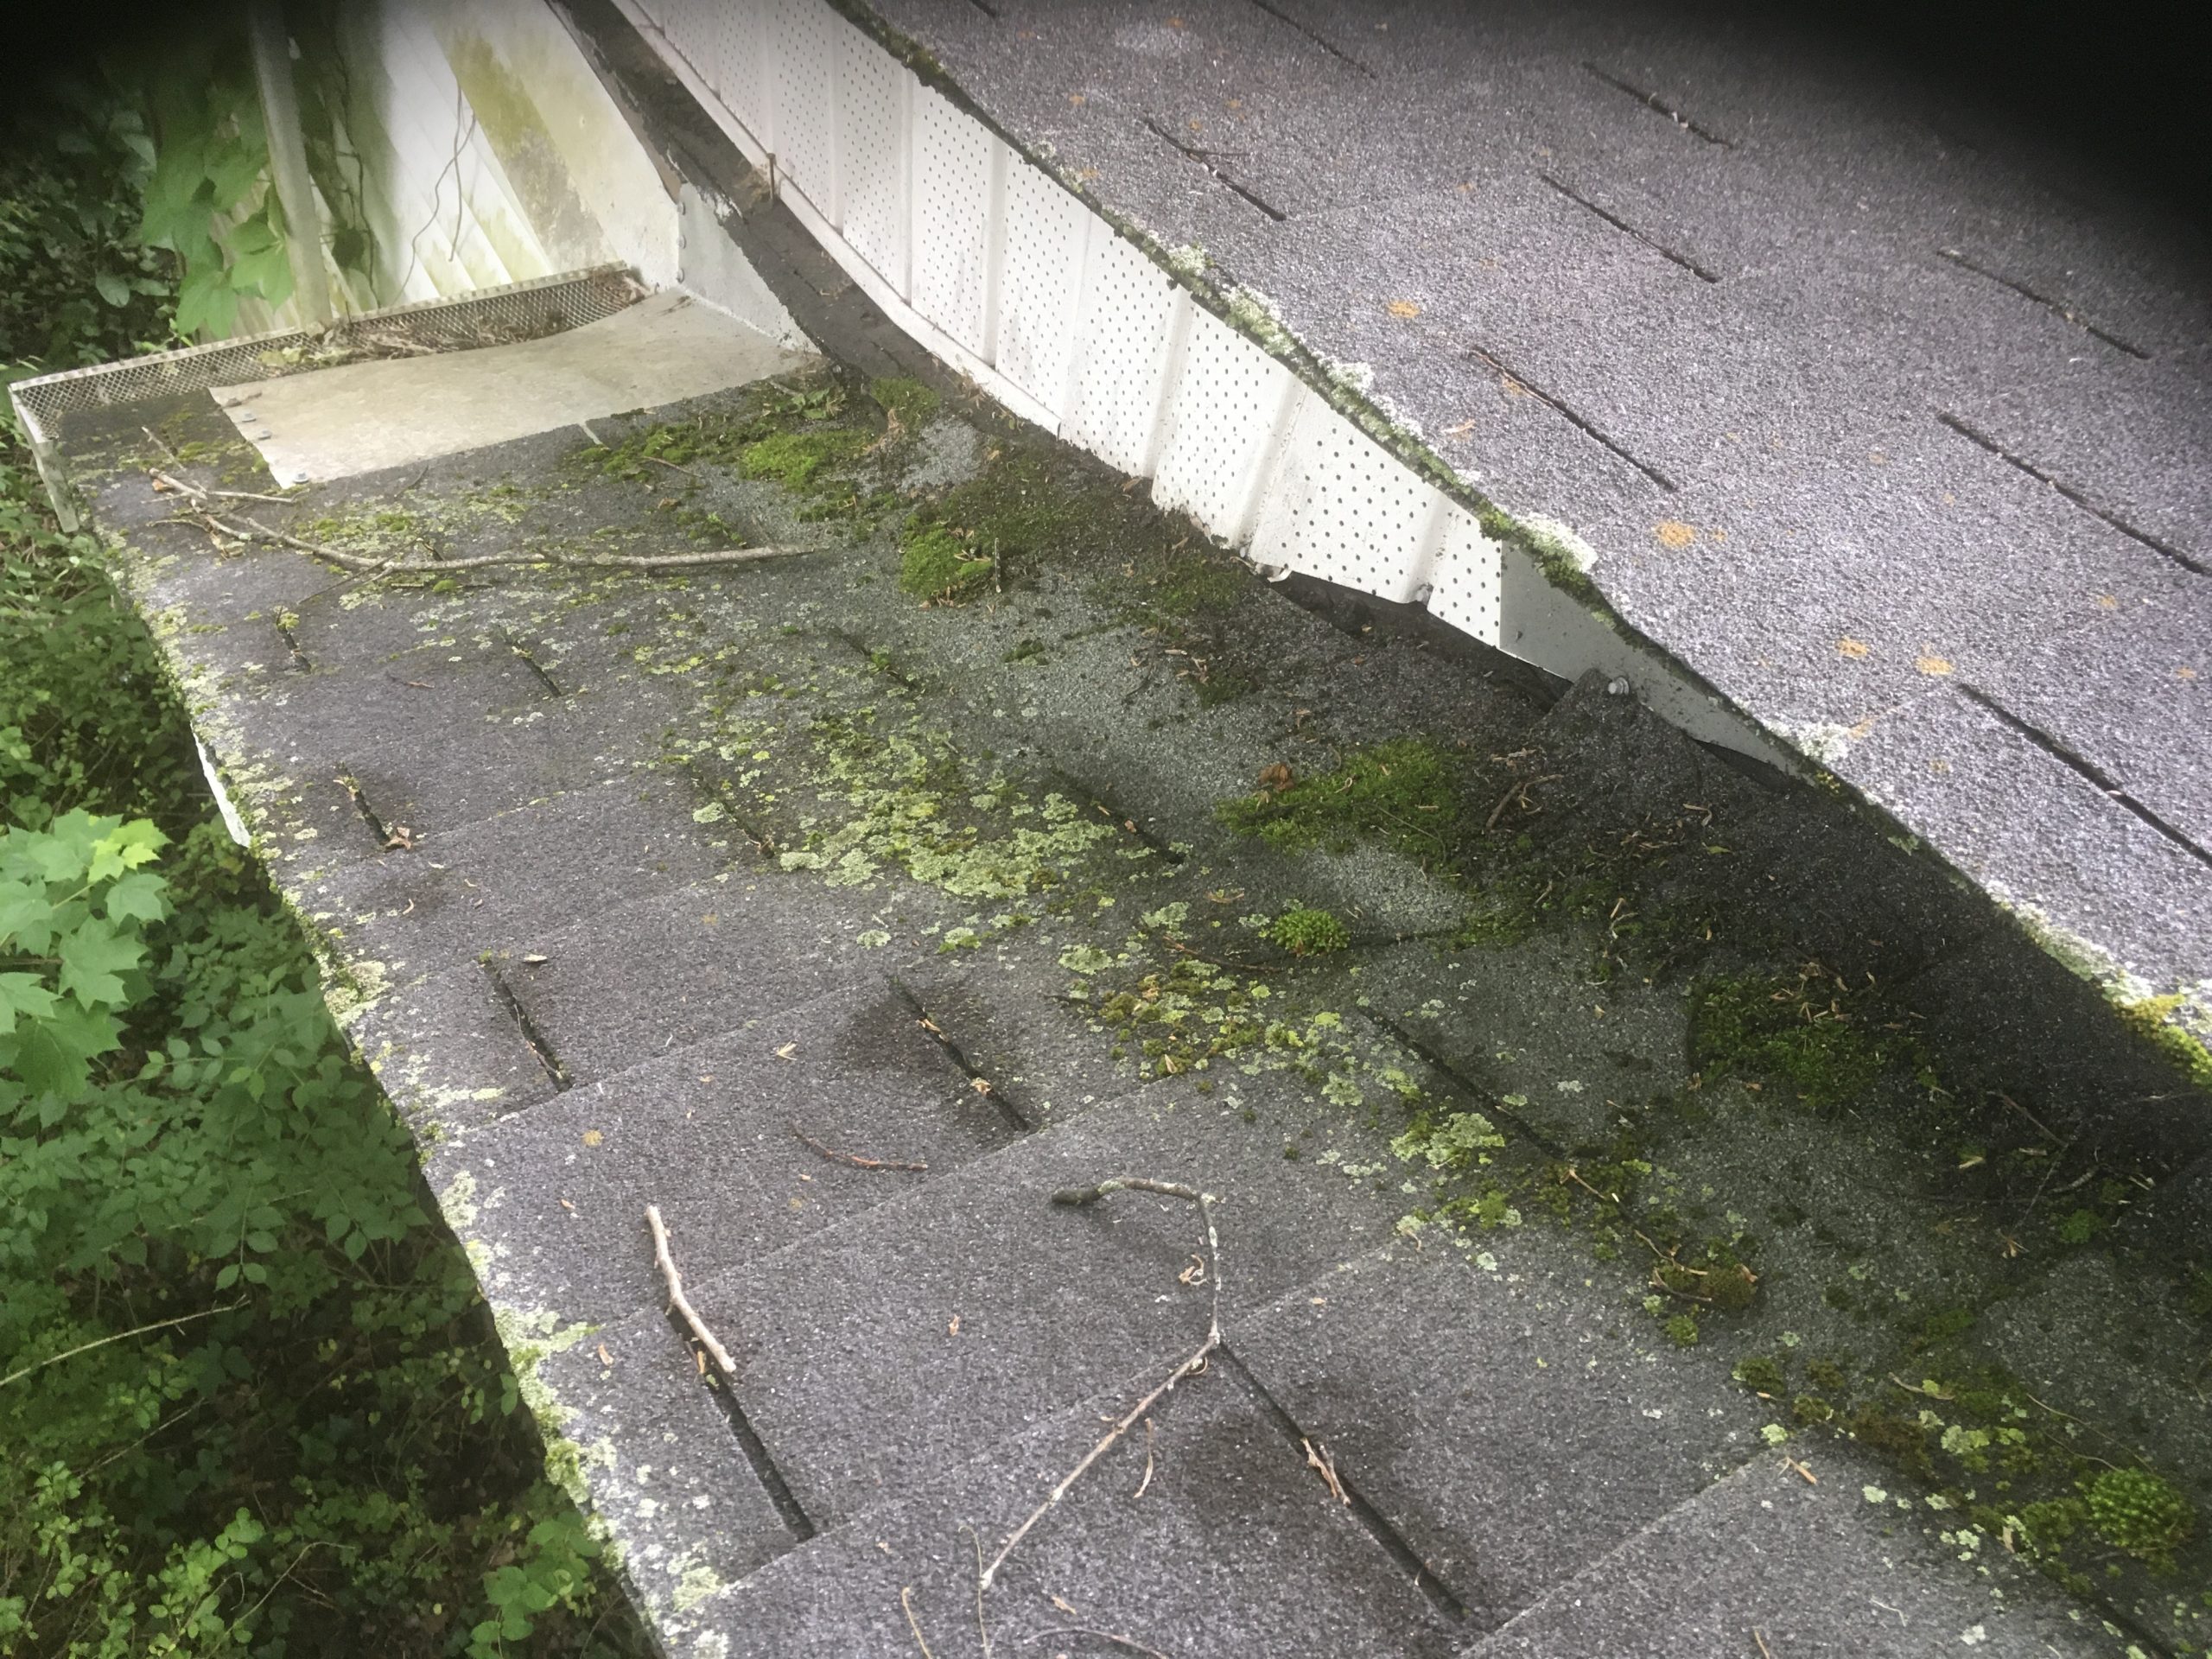 The shingles in this photo are covered in moss.